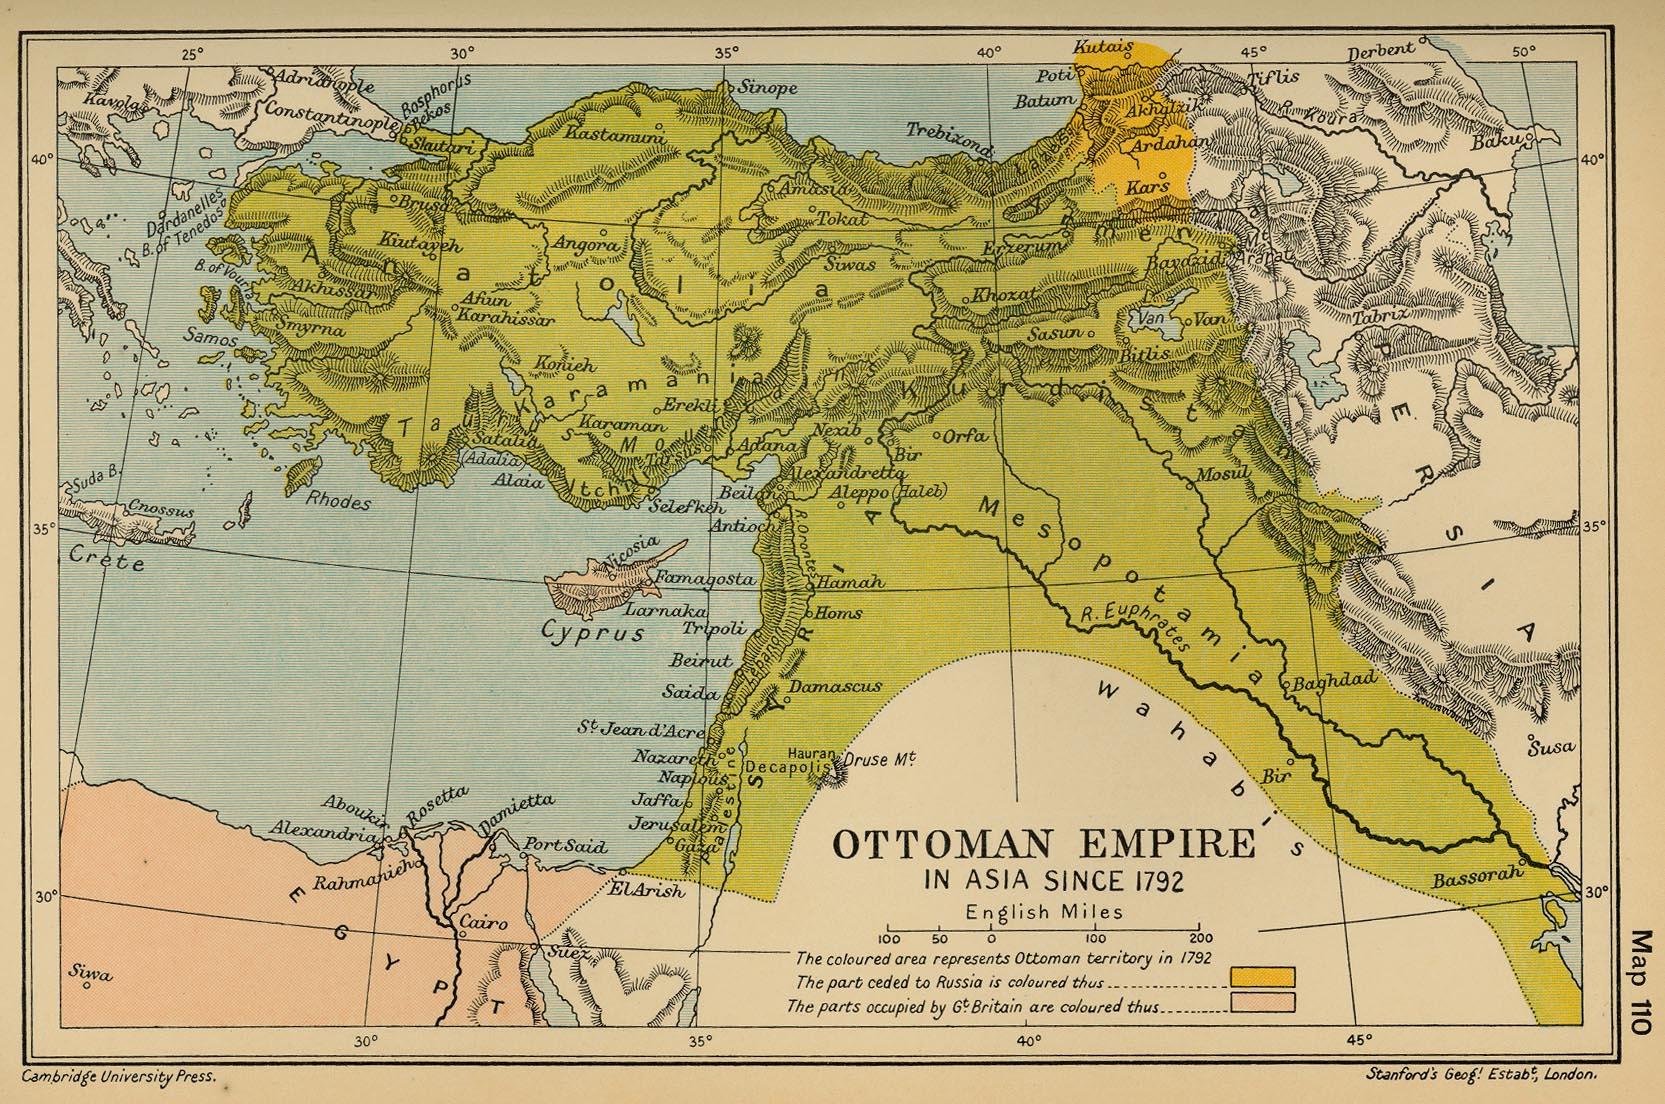 Map of the Ottoman Empire in Asia since 1792